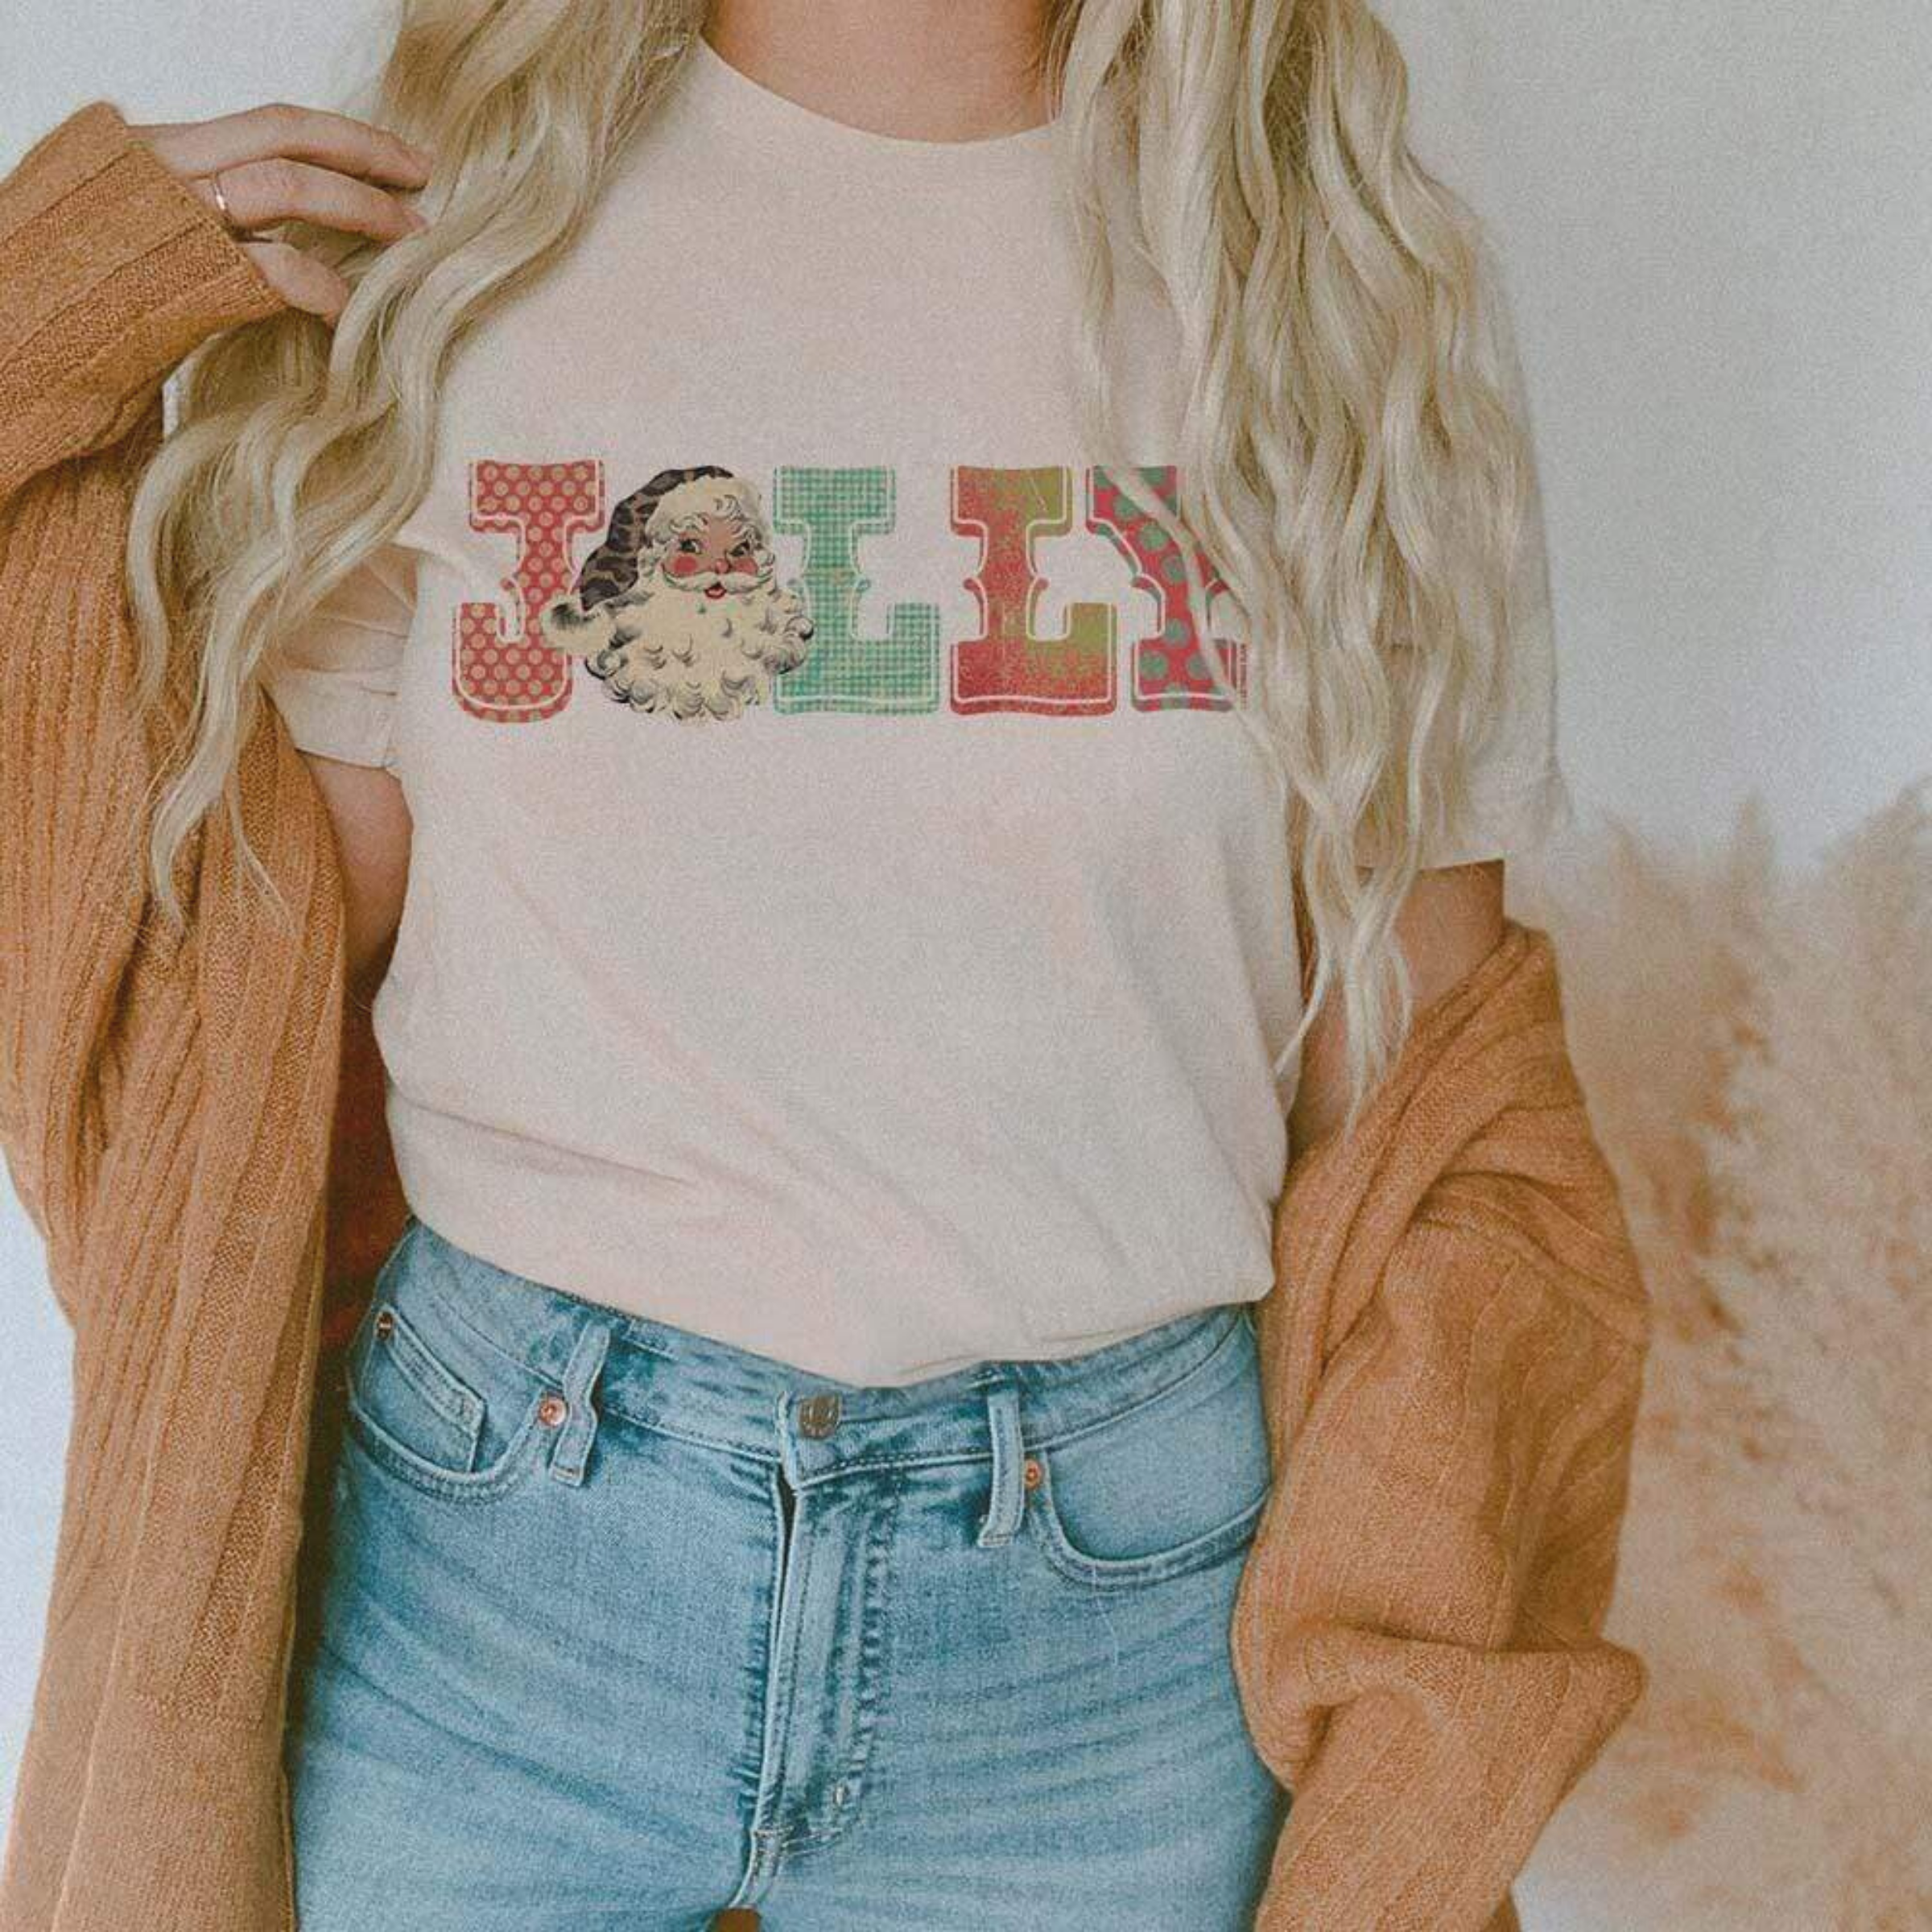 This cream tee includes a crew neckline, short sleeves, and a graphic that says "Jolly" in a cute, festive font with a Santa Clause graphic serving as the "O" in the word "JOLLY". The model has this tee shown with rolled sleeves, a camel cardigan, and a light wash pair of denim jeans. 